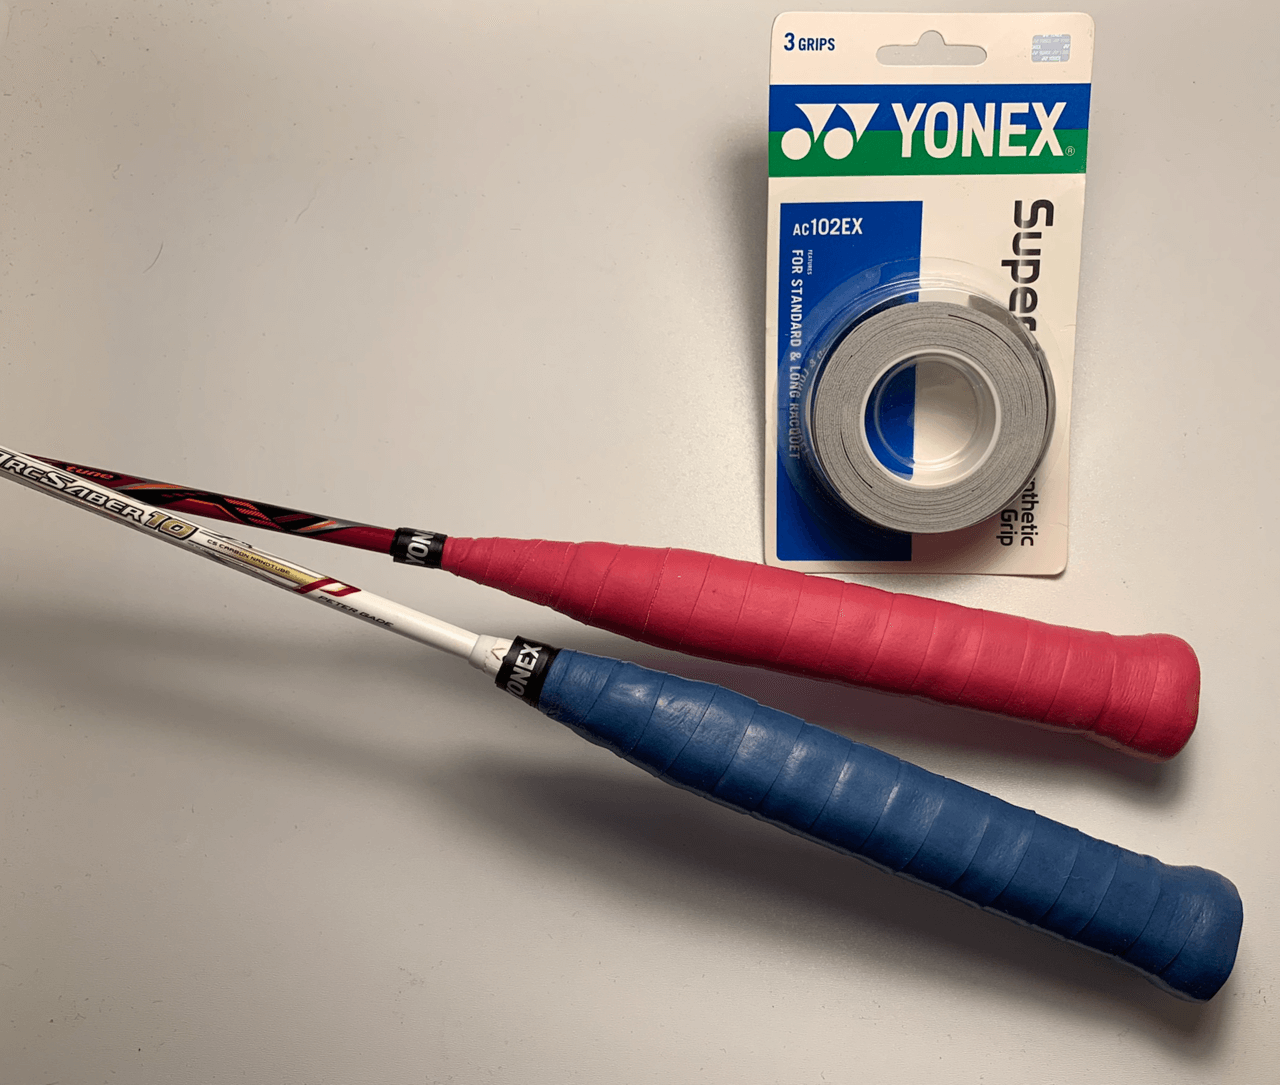 Grap 2 Yonex Racket Grip Available in Black, Blue, Yellow, Pink, White, Red 